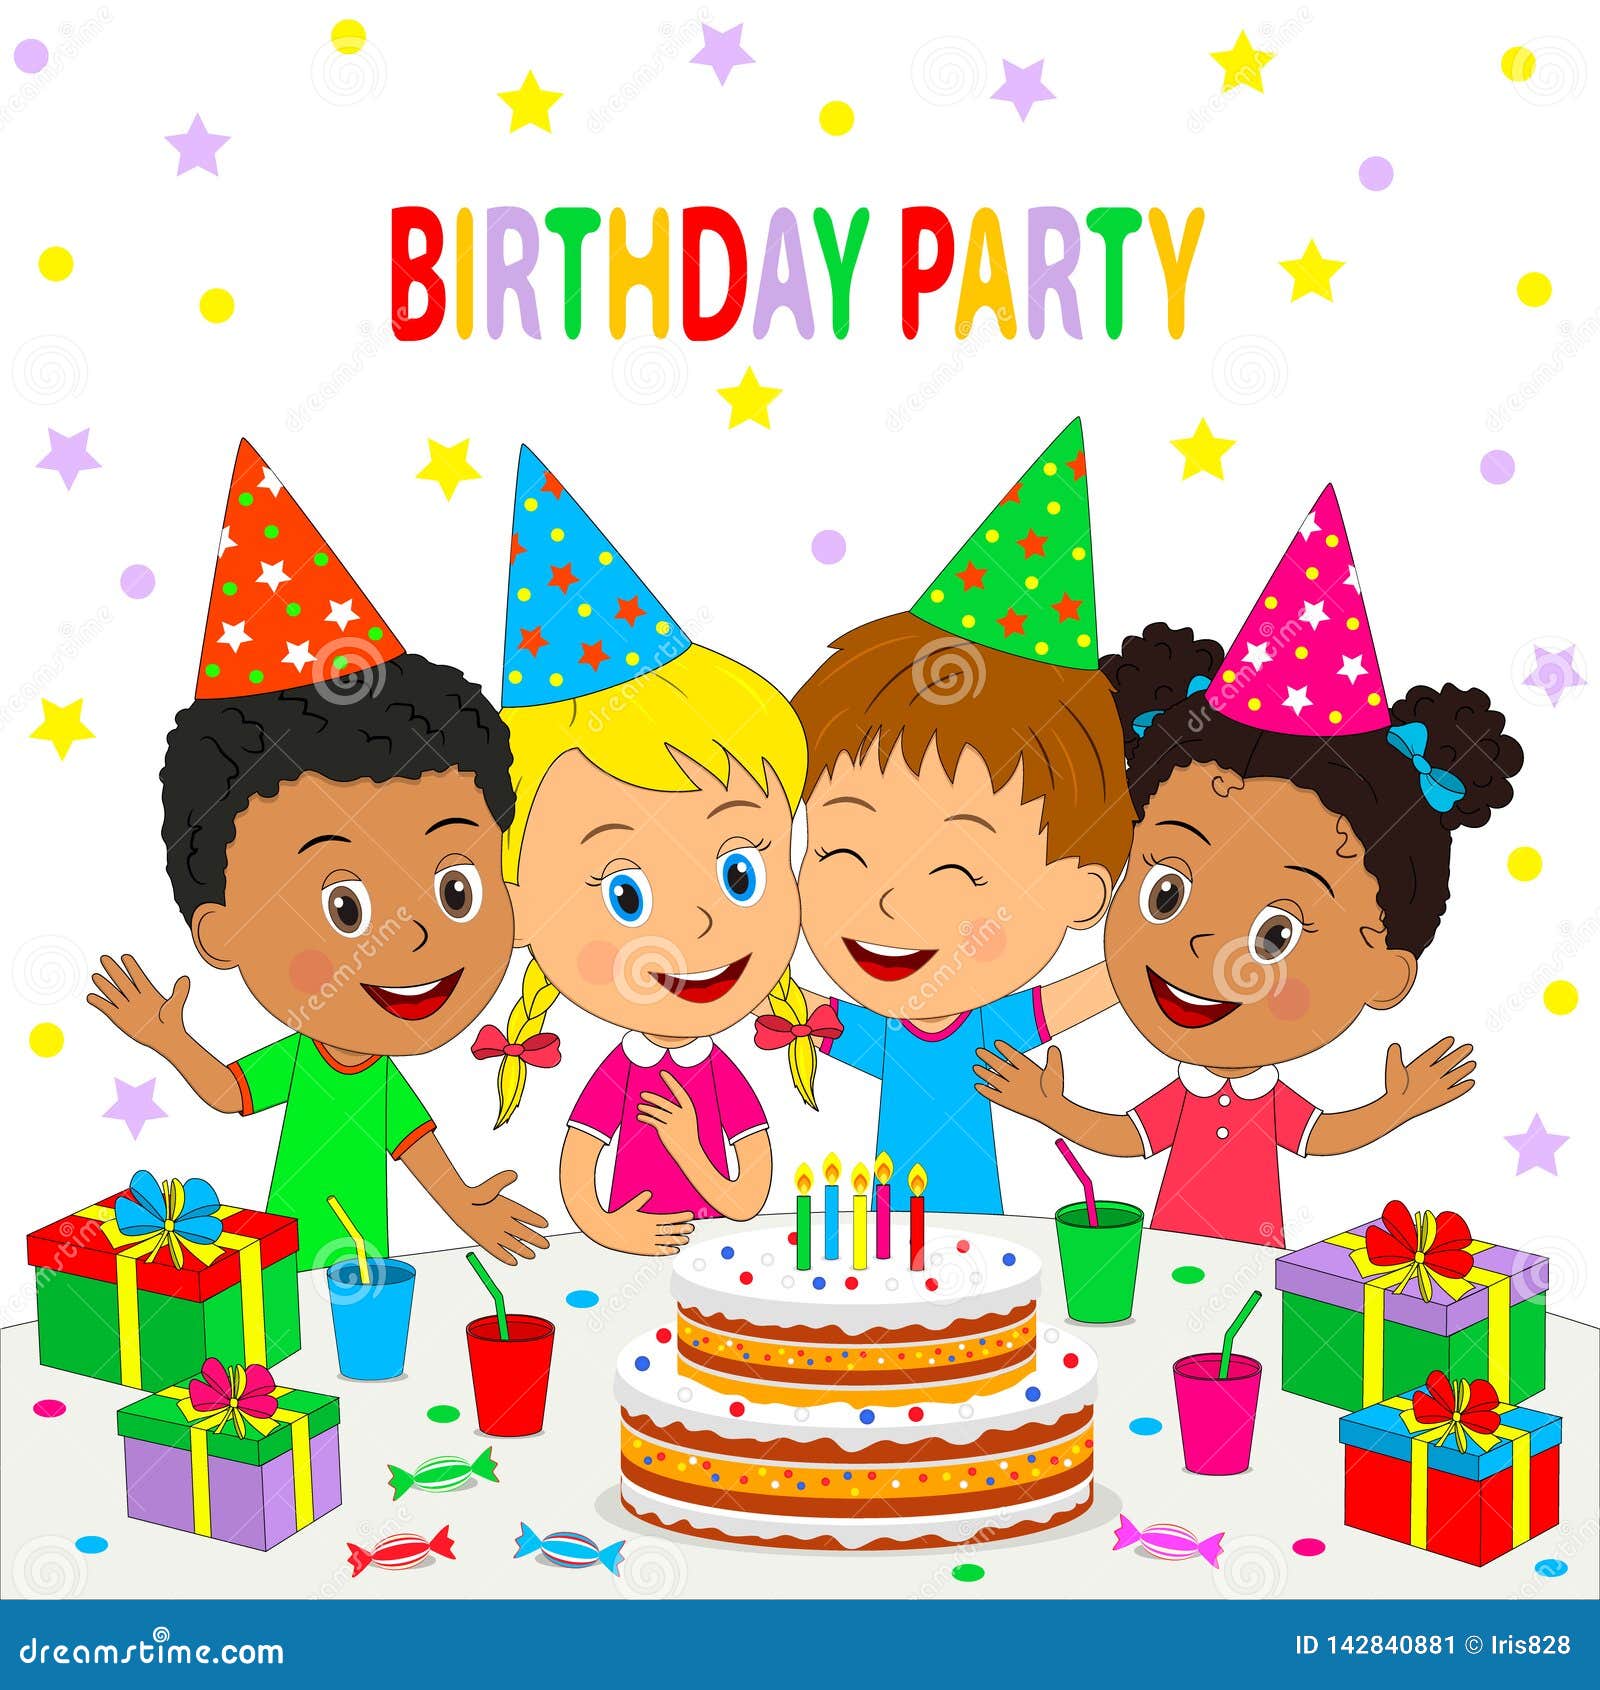 75+ Birthday Party Clipart - カトロロ壁紙